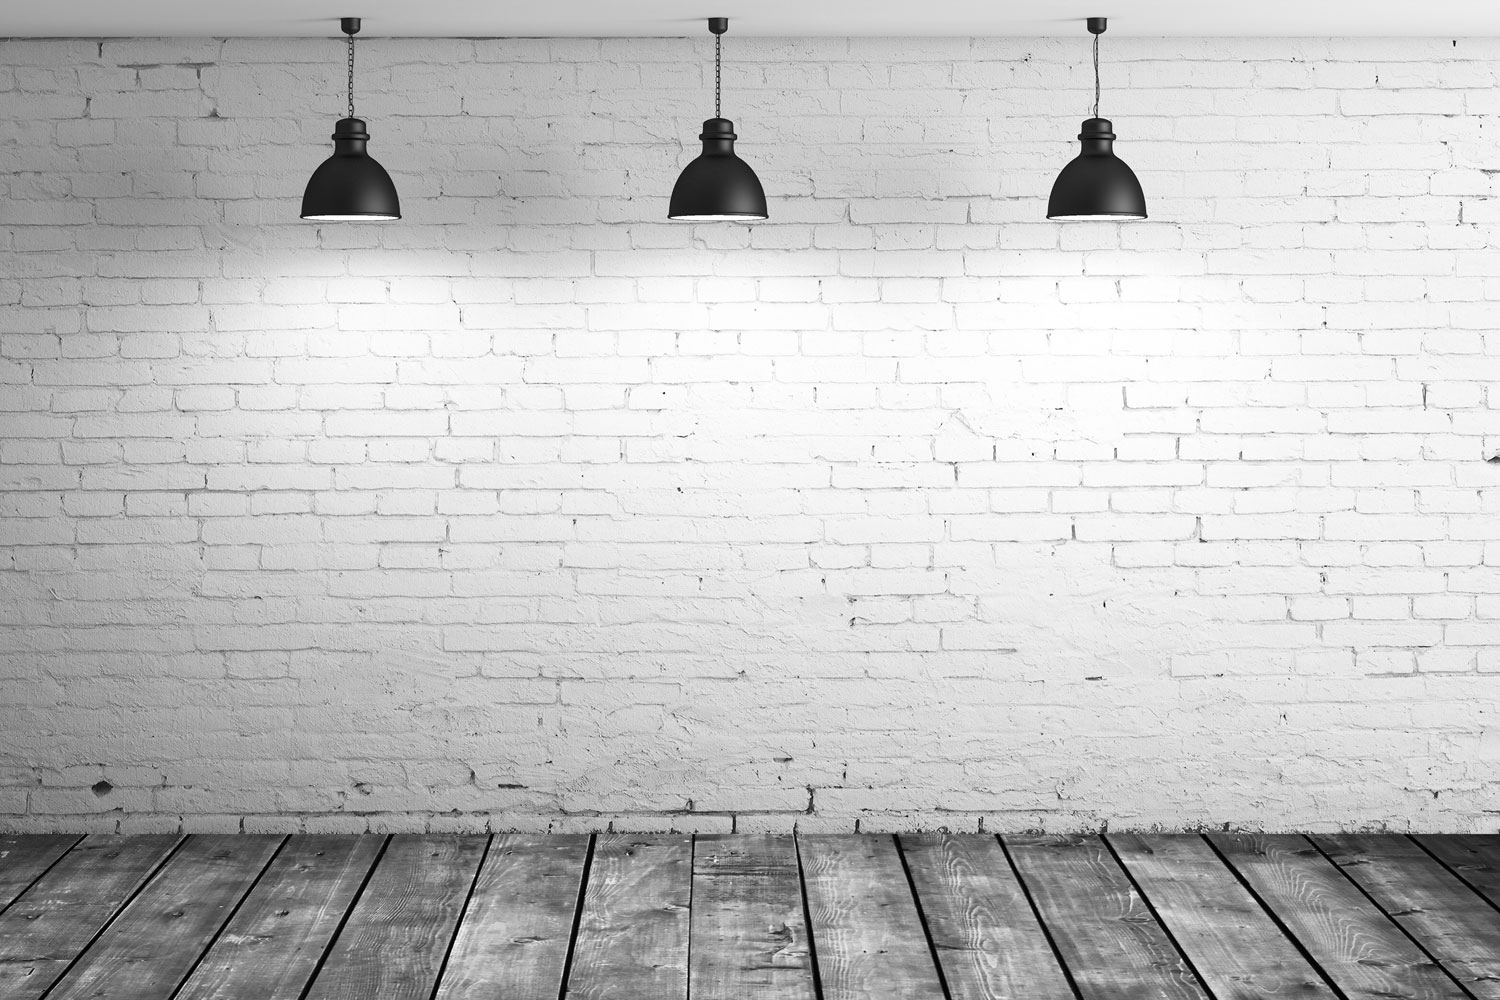 Lamps On Brick Wall - White Brick With Lights - HD Wallpaper 